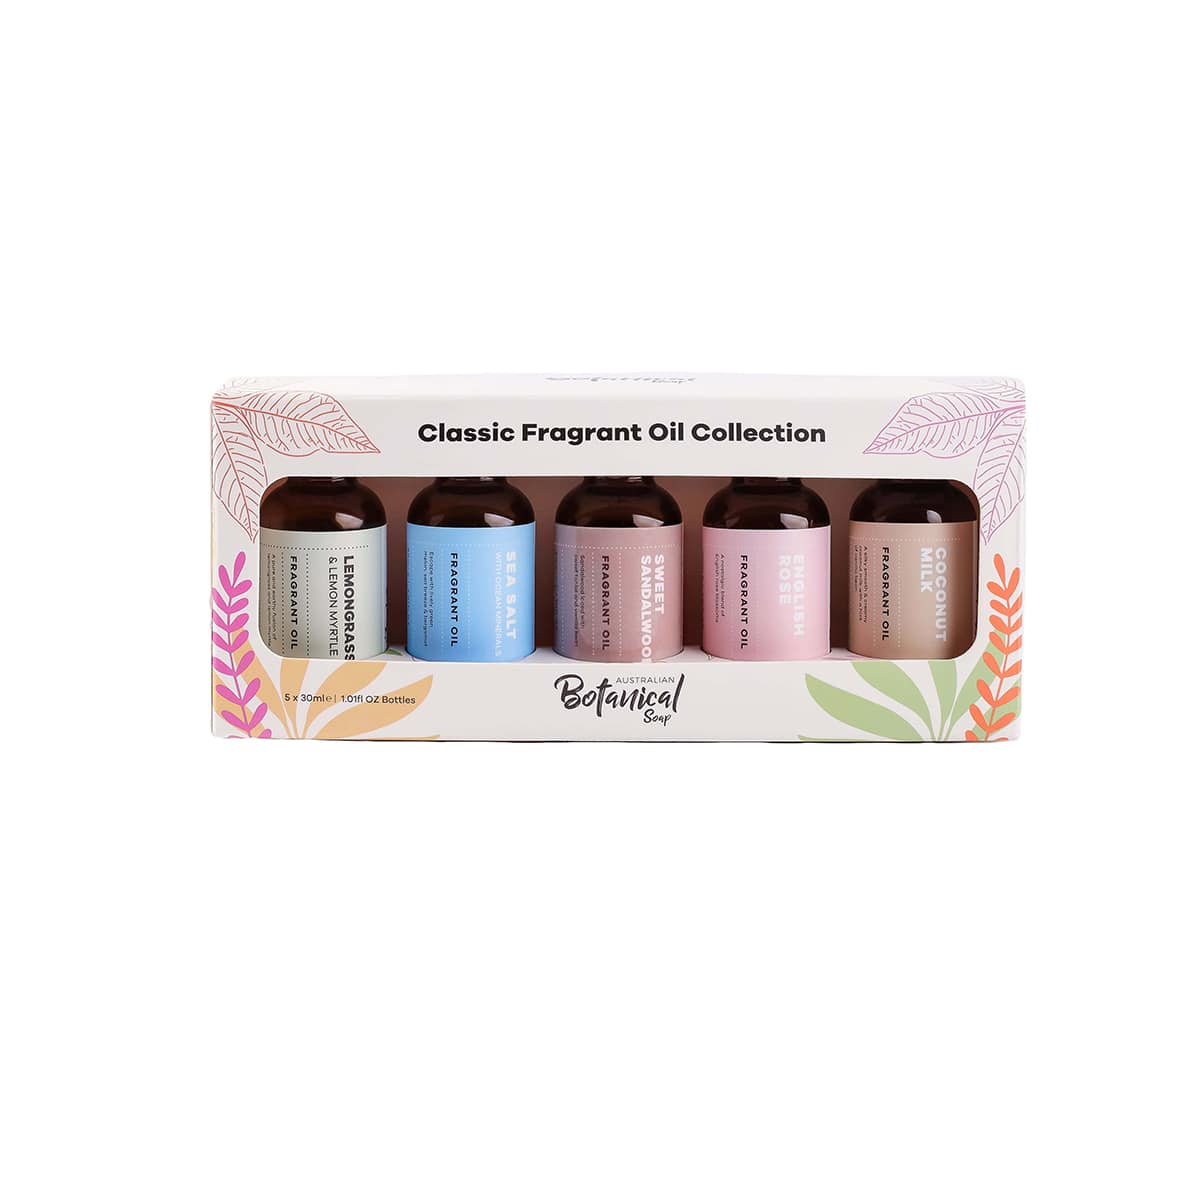 Classic Fragrant Oil Collection x 5 Pack inside